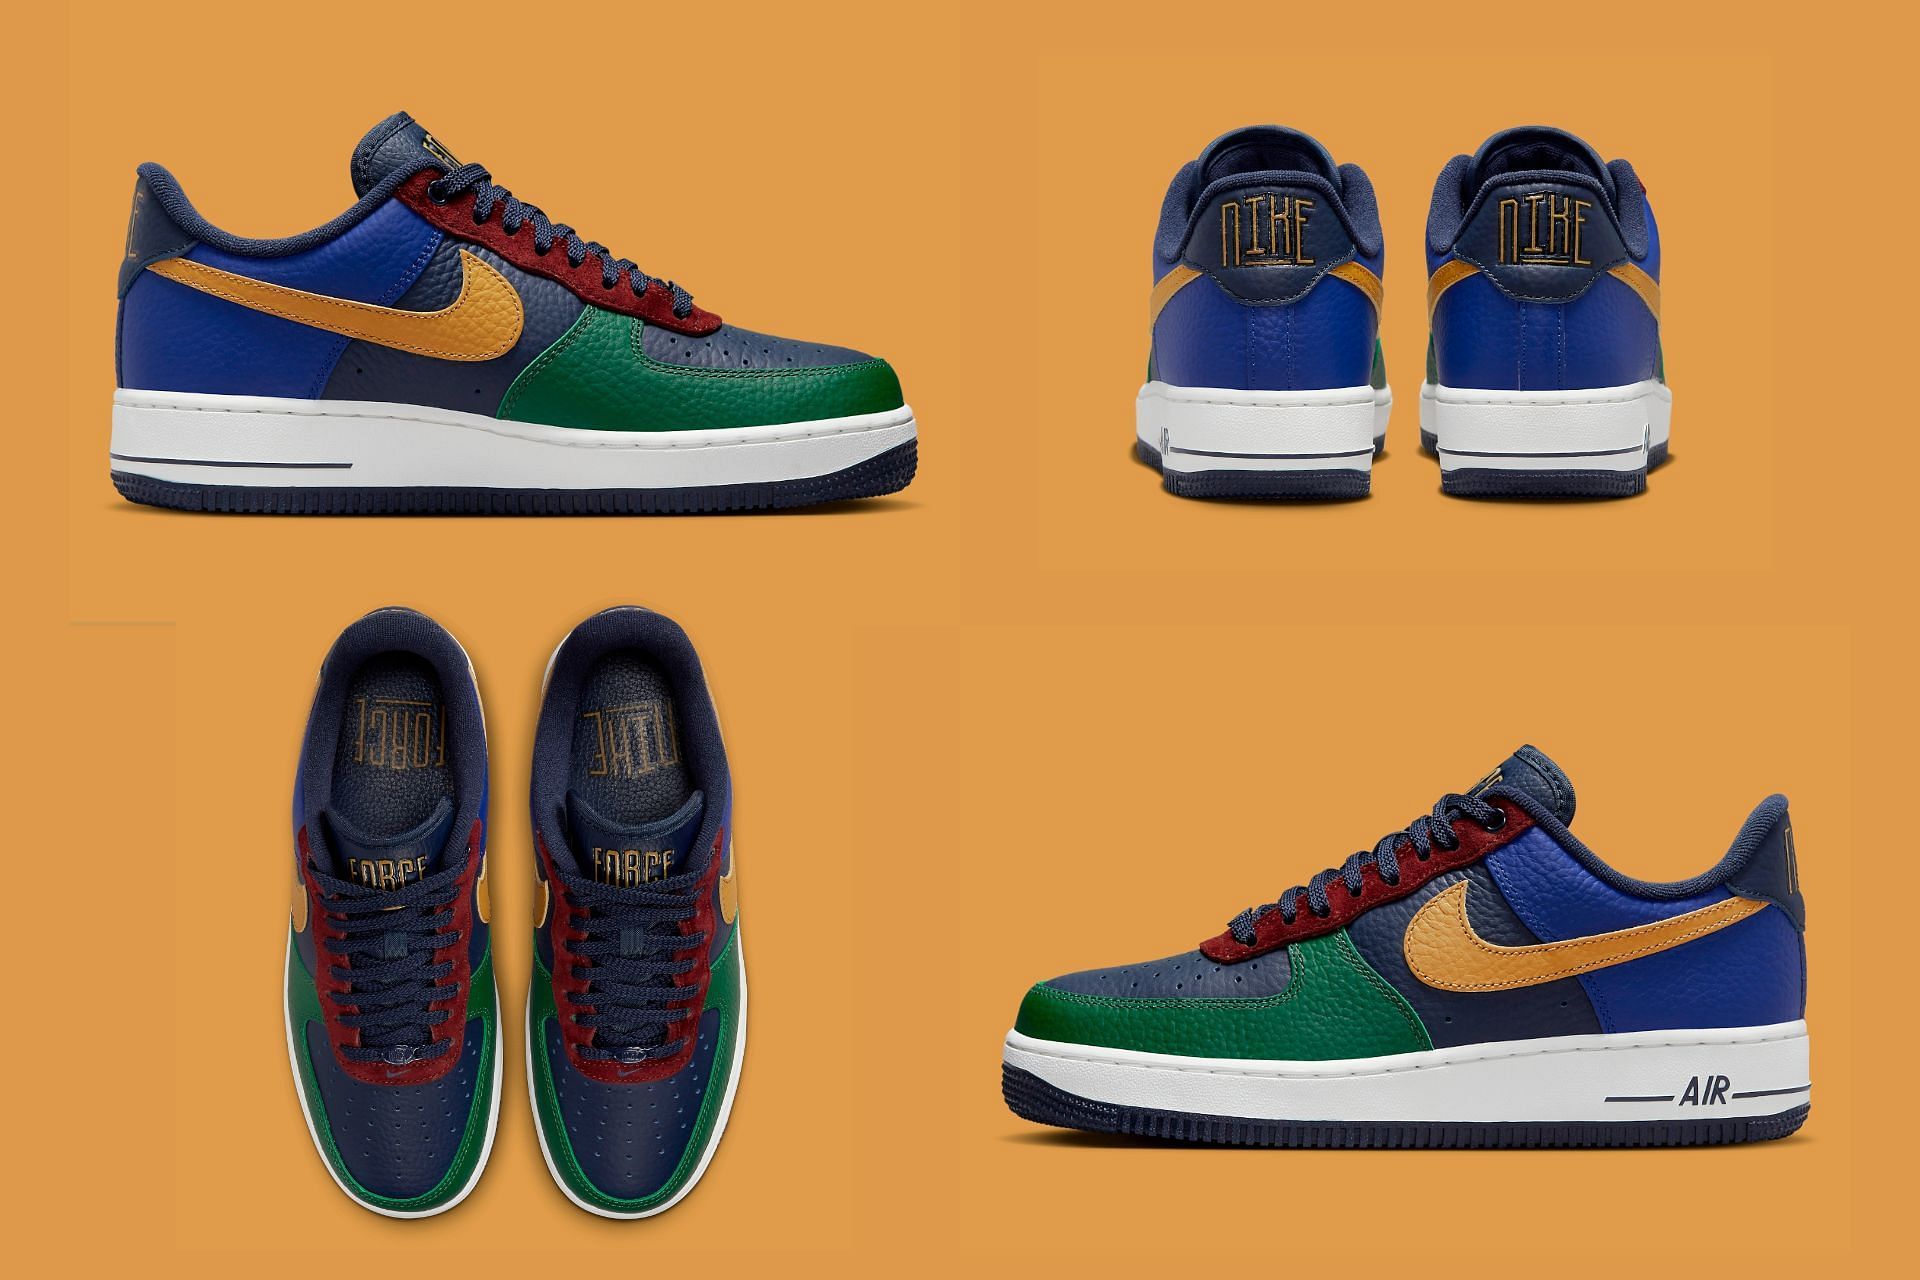 Where to buy Nike Air Force 1 Low Gorge Green shoes? Price and more details  explored